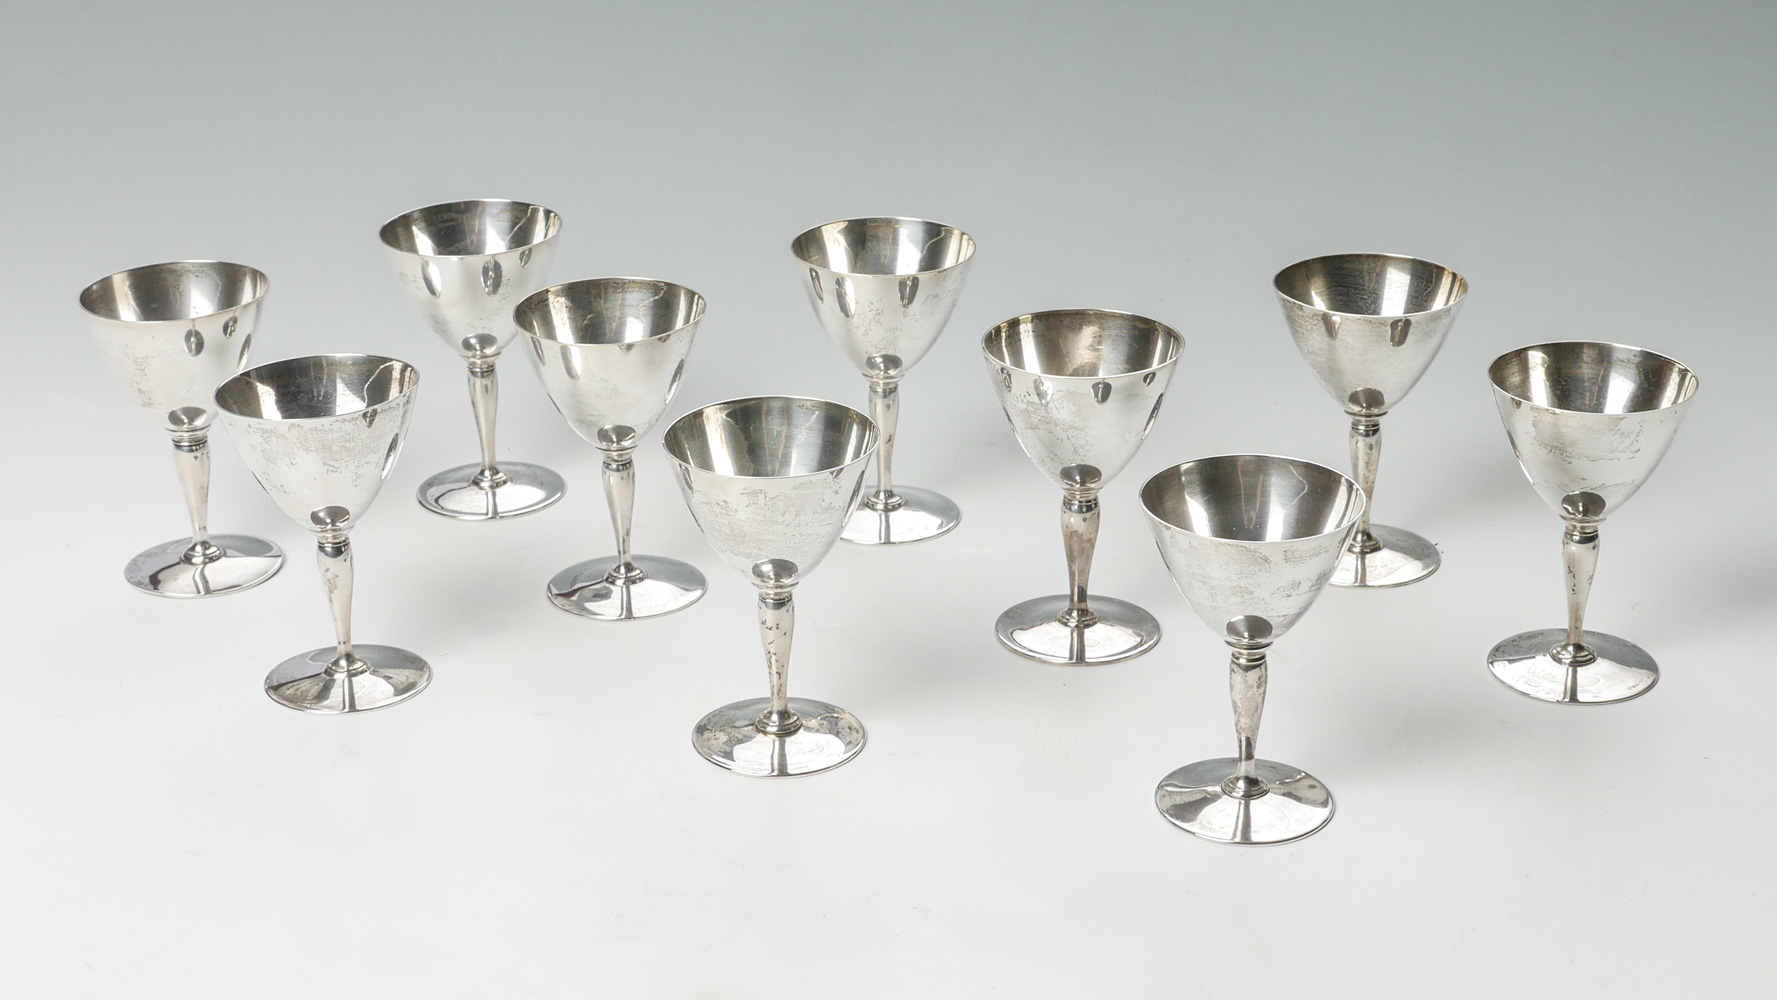 SET OF 10 TIFFANY STERLING CORDIAL